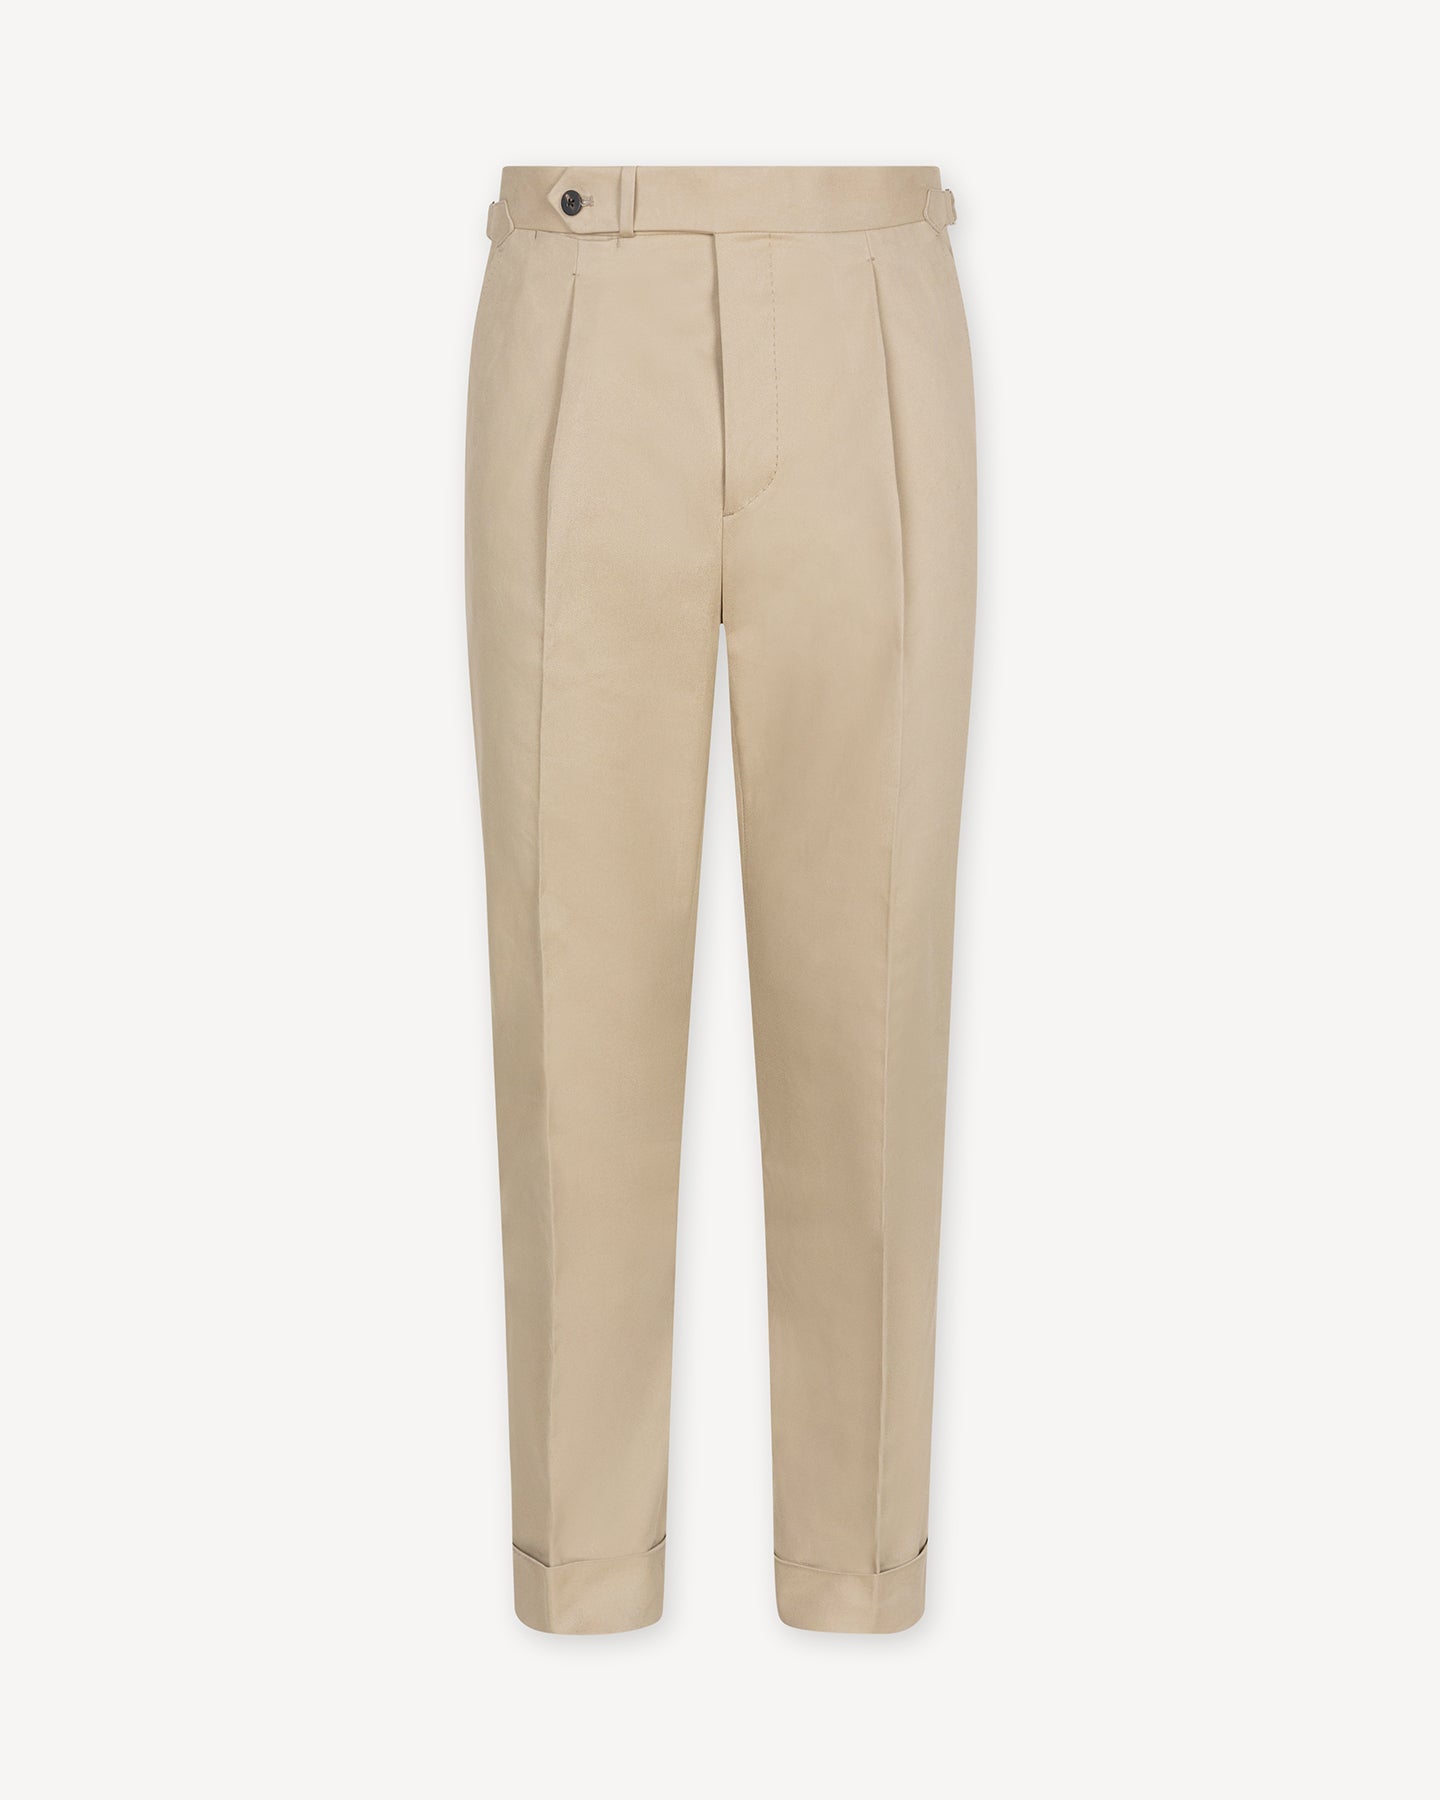 Stone cotton trousers with single pleats and side adjusters